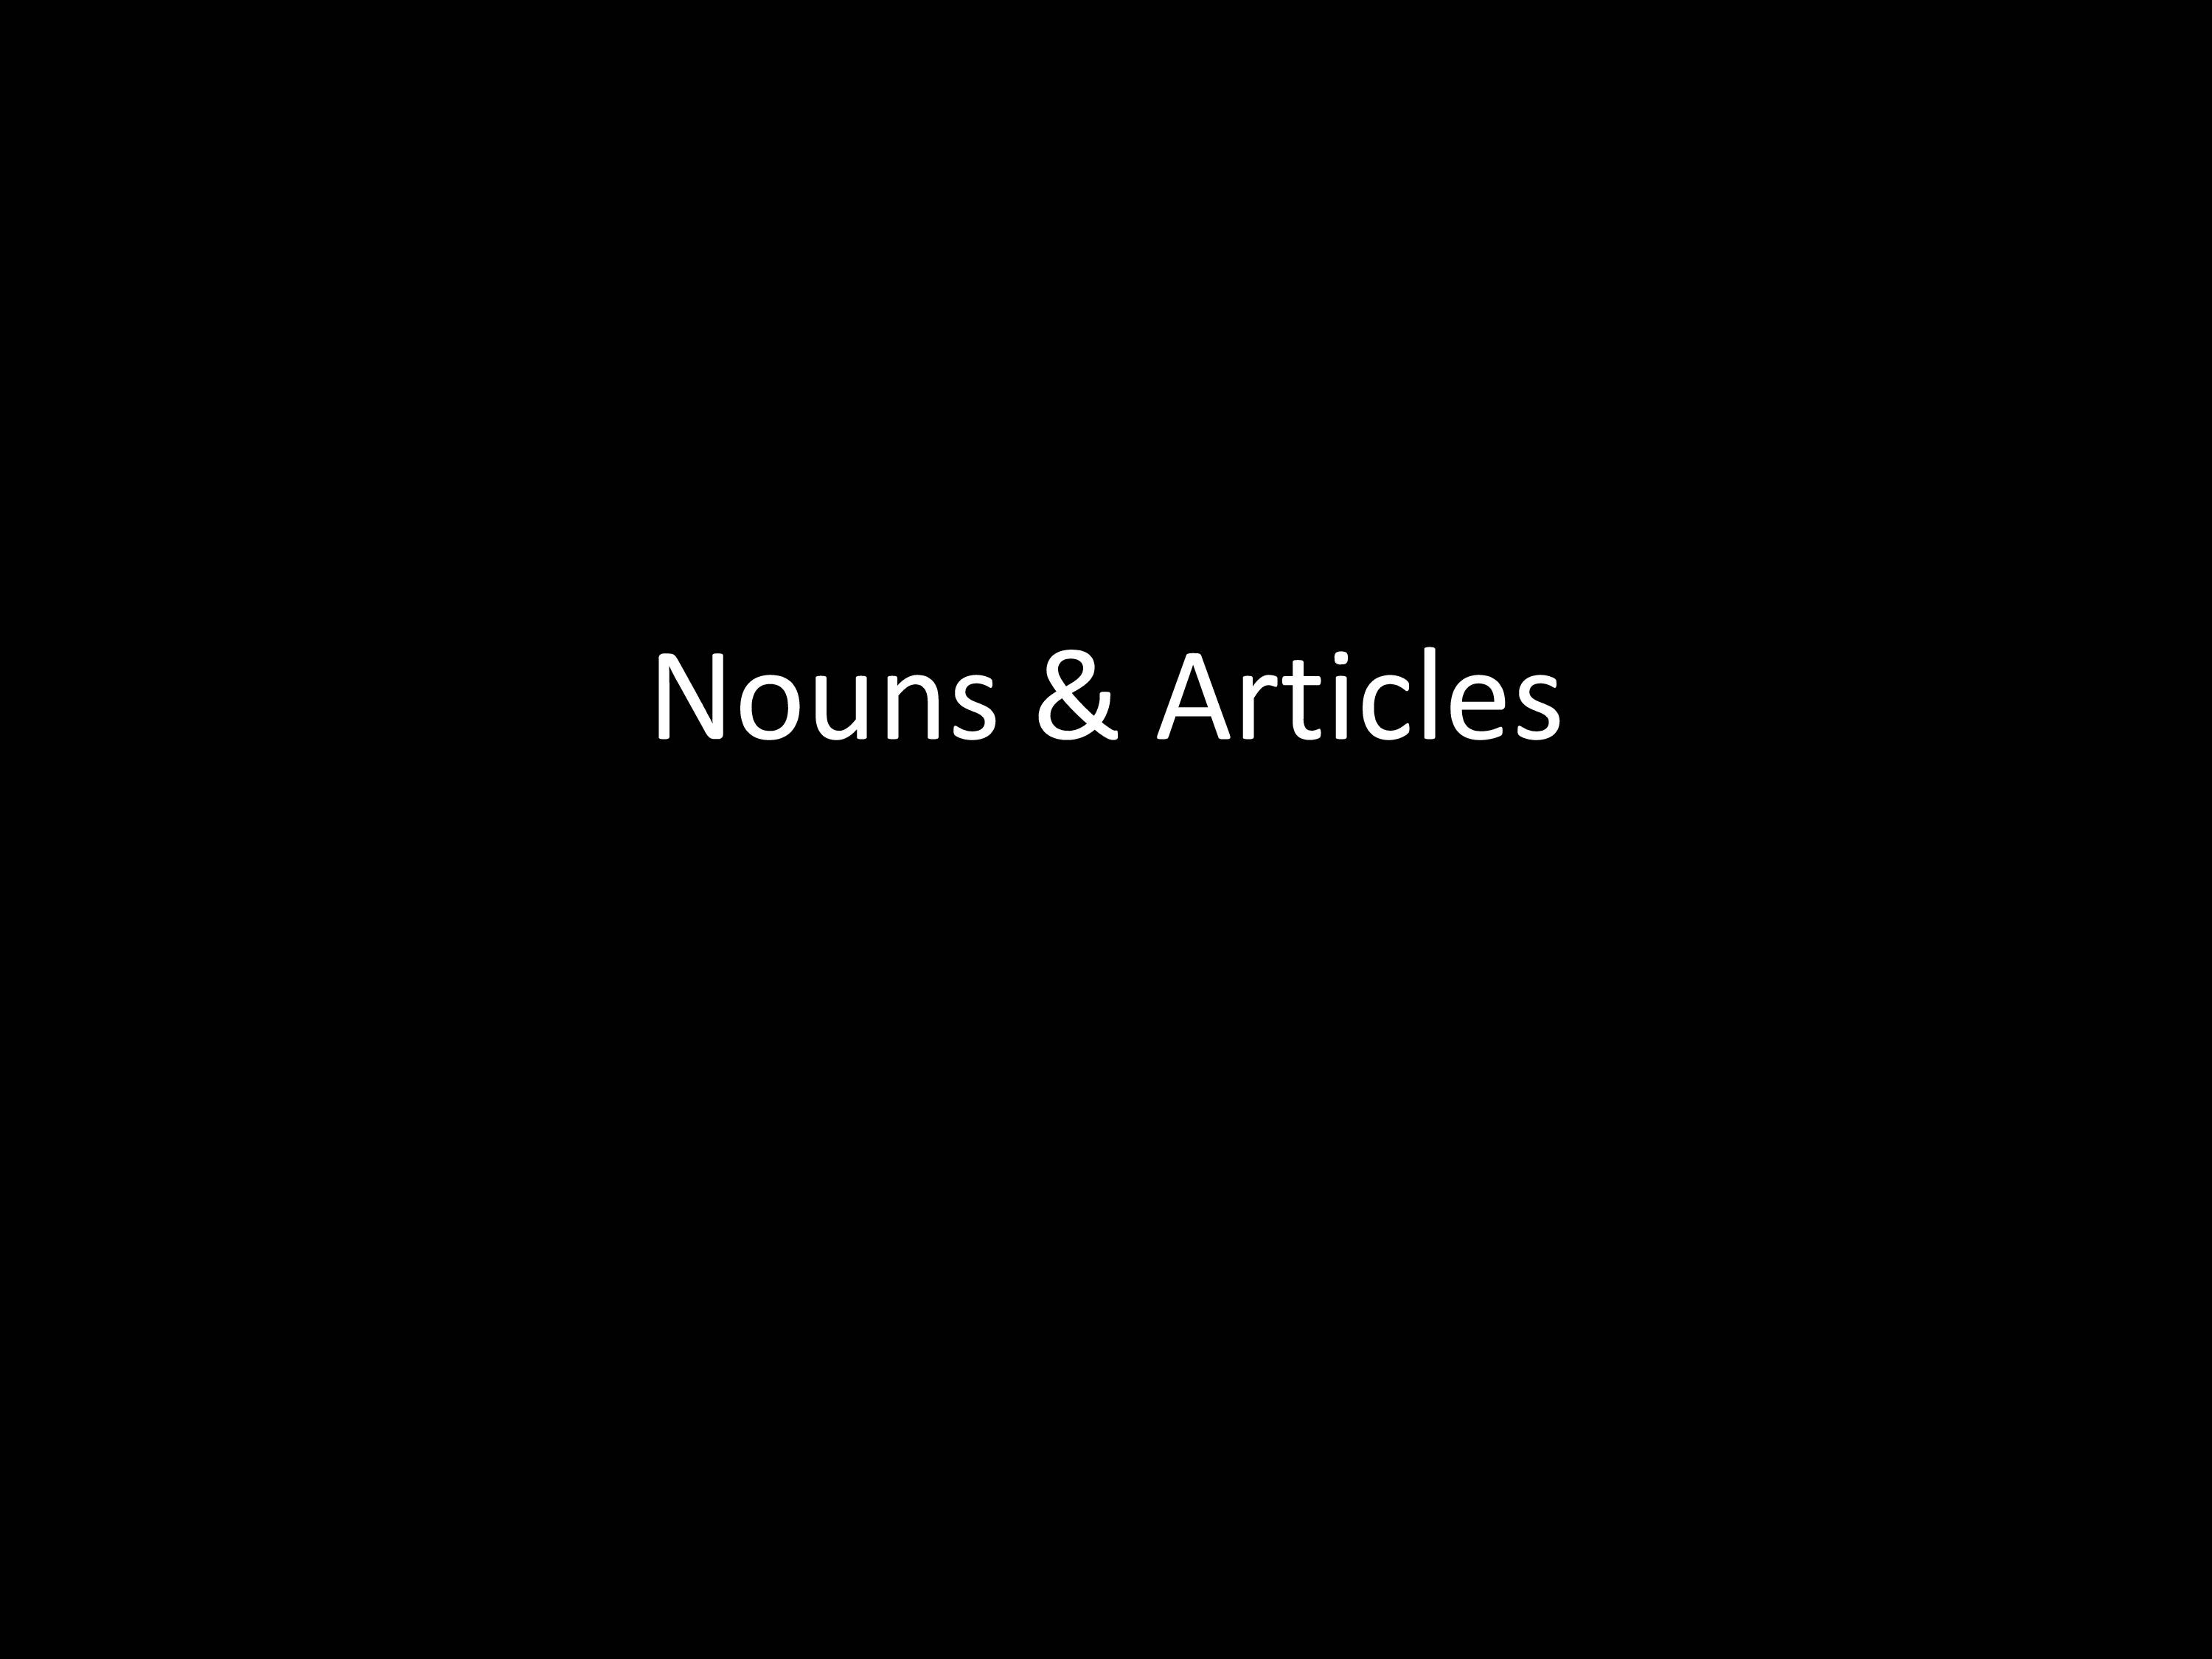 Nouns and Articles